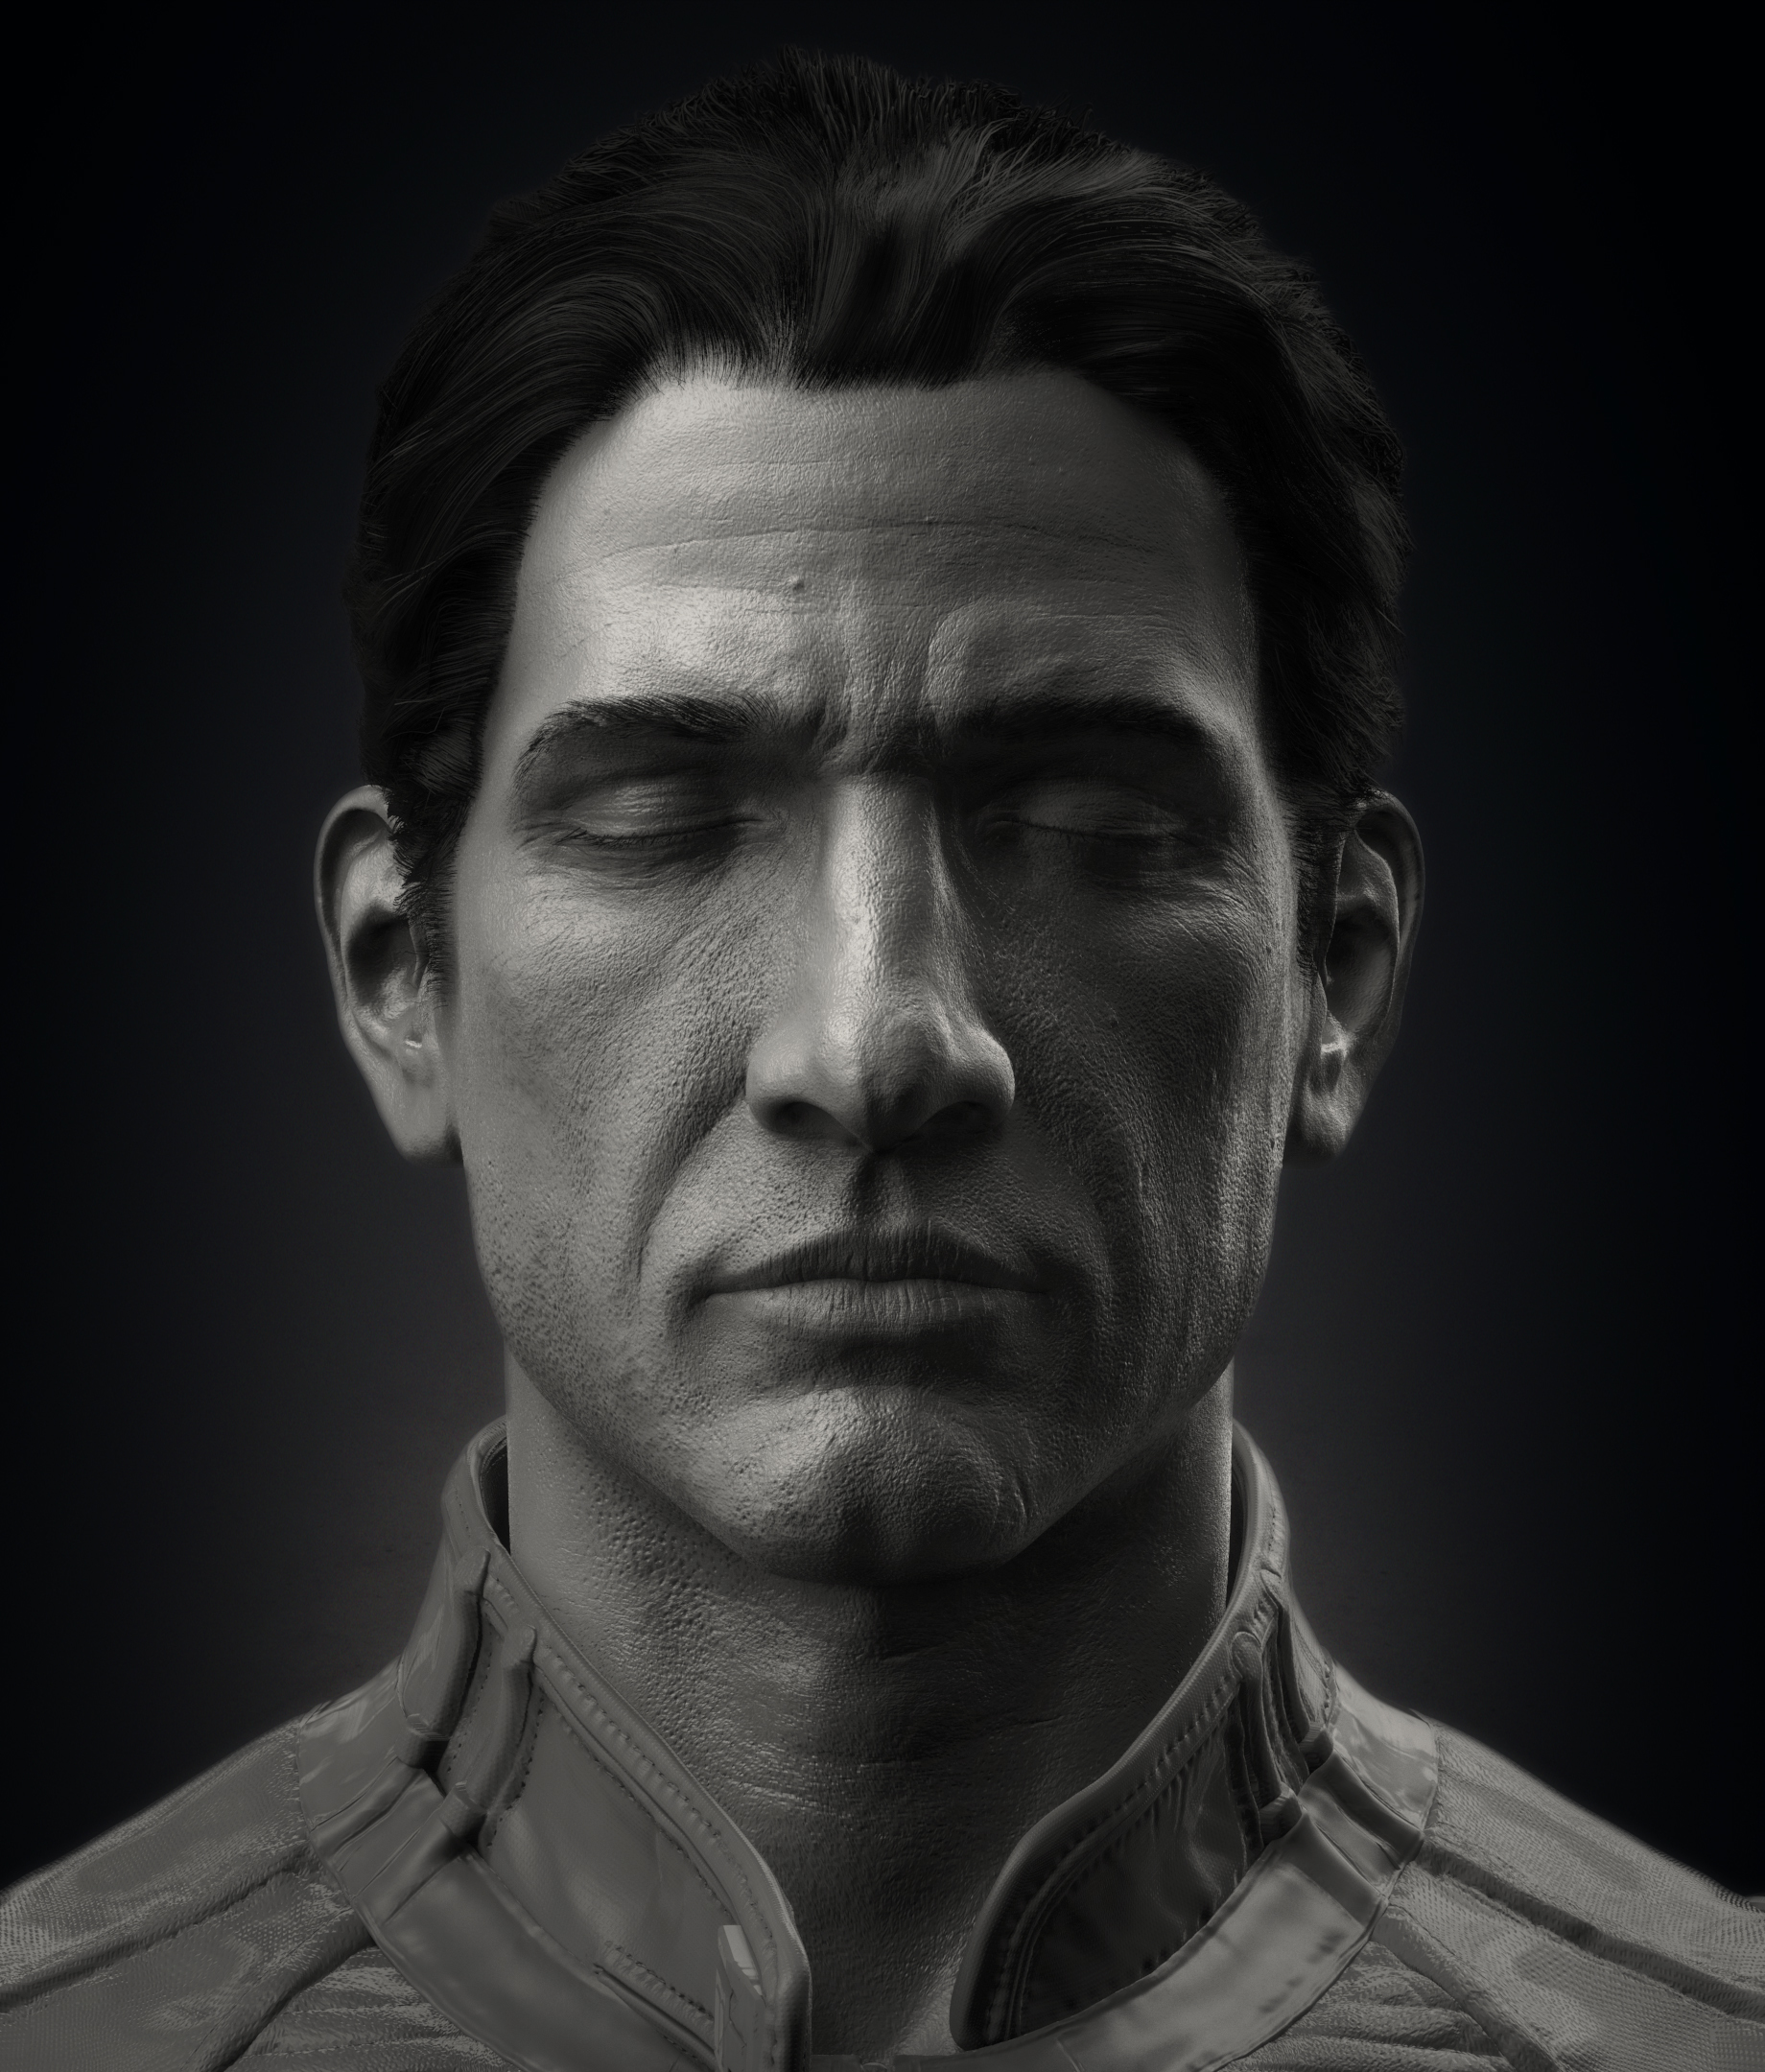 fallout 4 default character